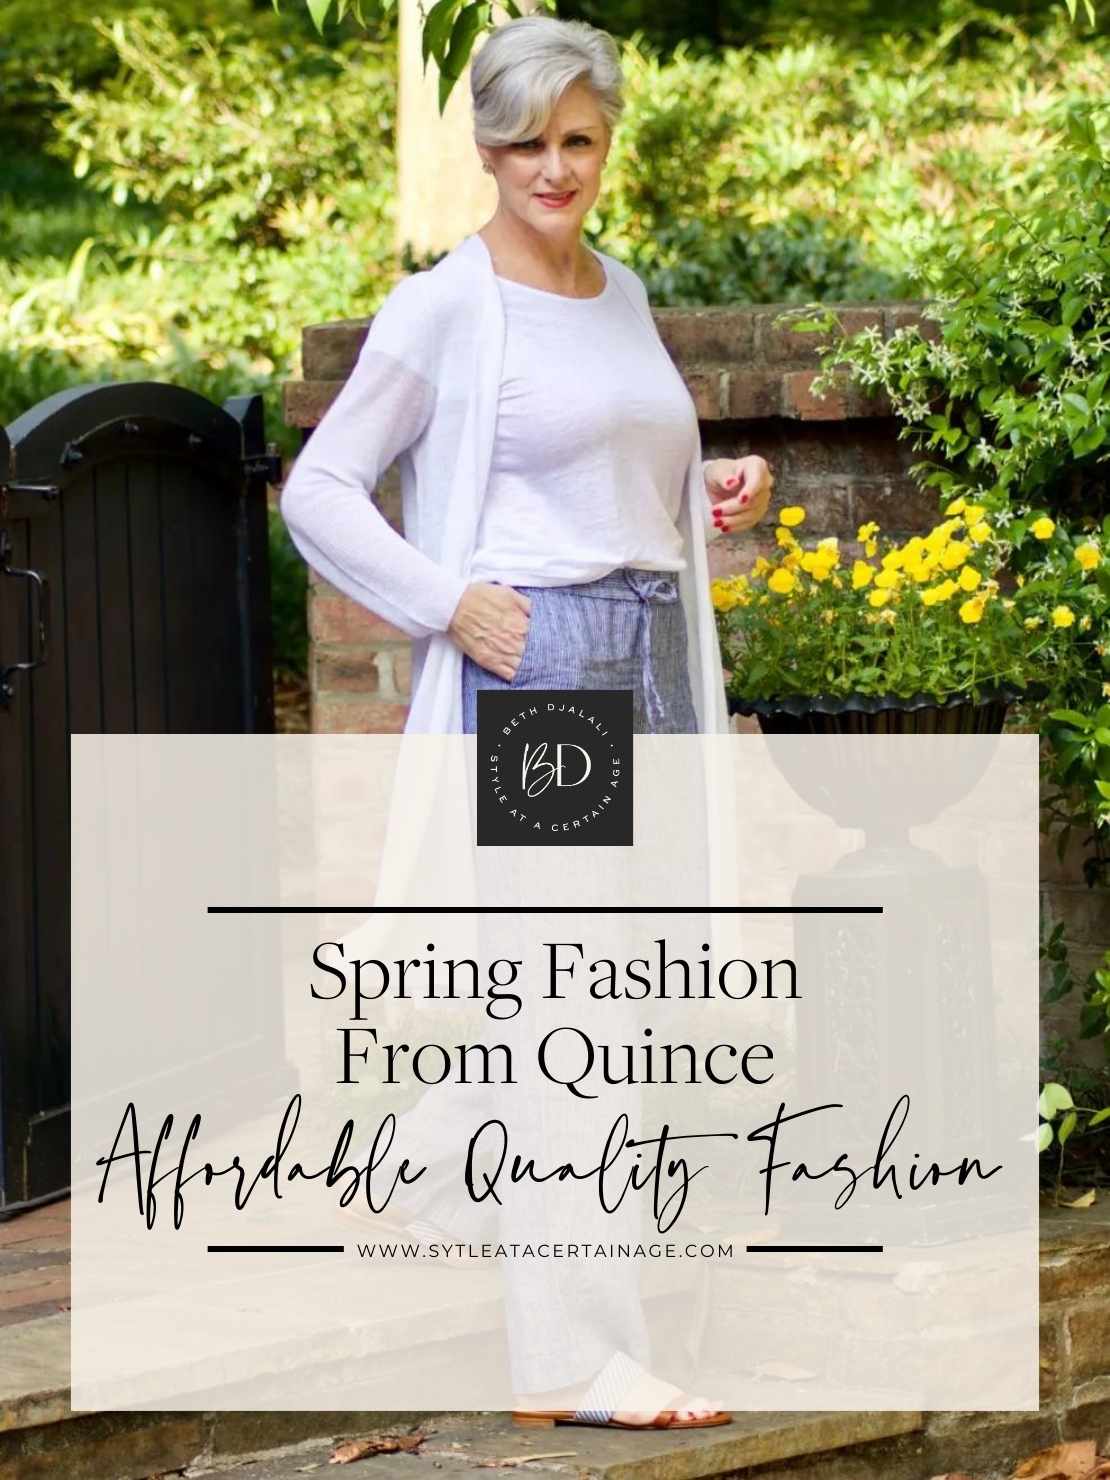 Spring Fashion From Quince: Luxurious Style at Affordable Prices